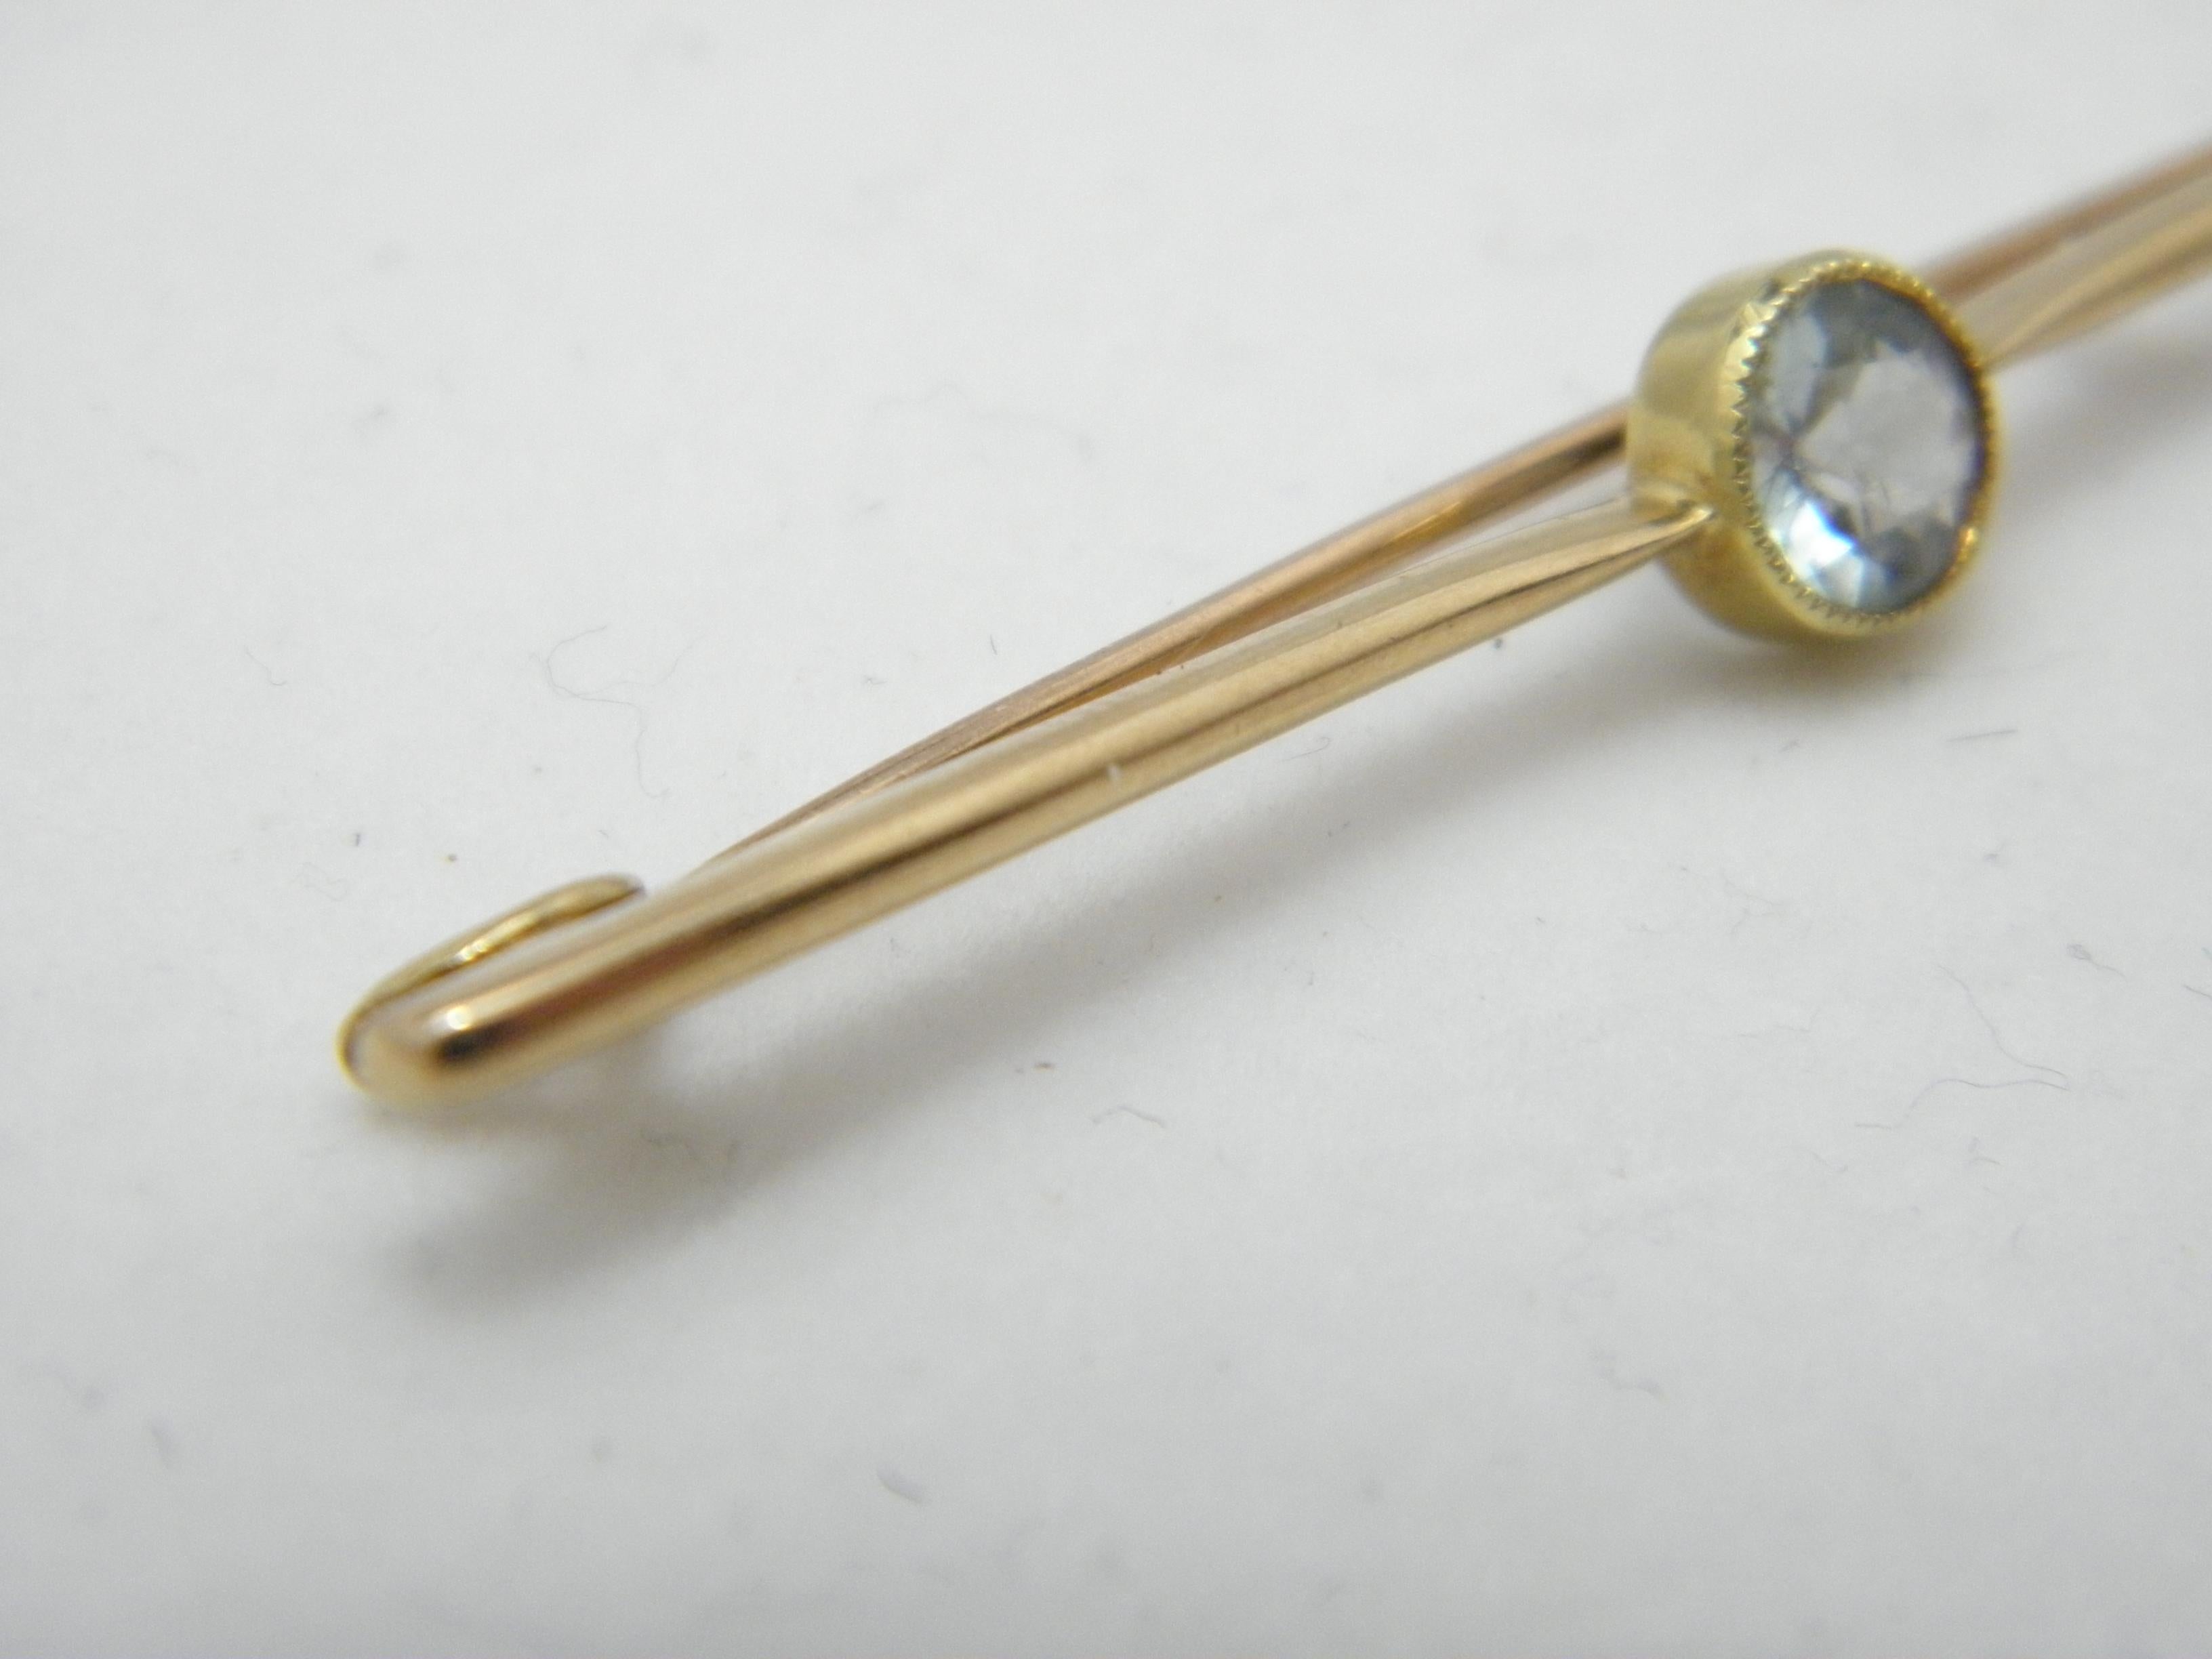 Victorian Antique 15ct Gold Aquamarine Solitaire Bar Brooch Pin c1890 625 Purity Heavy For Sale